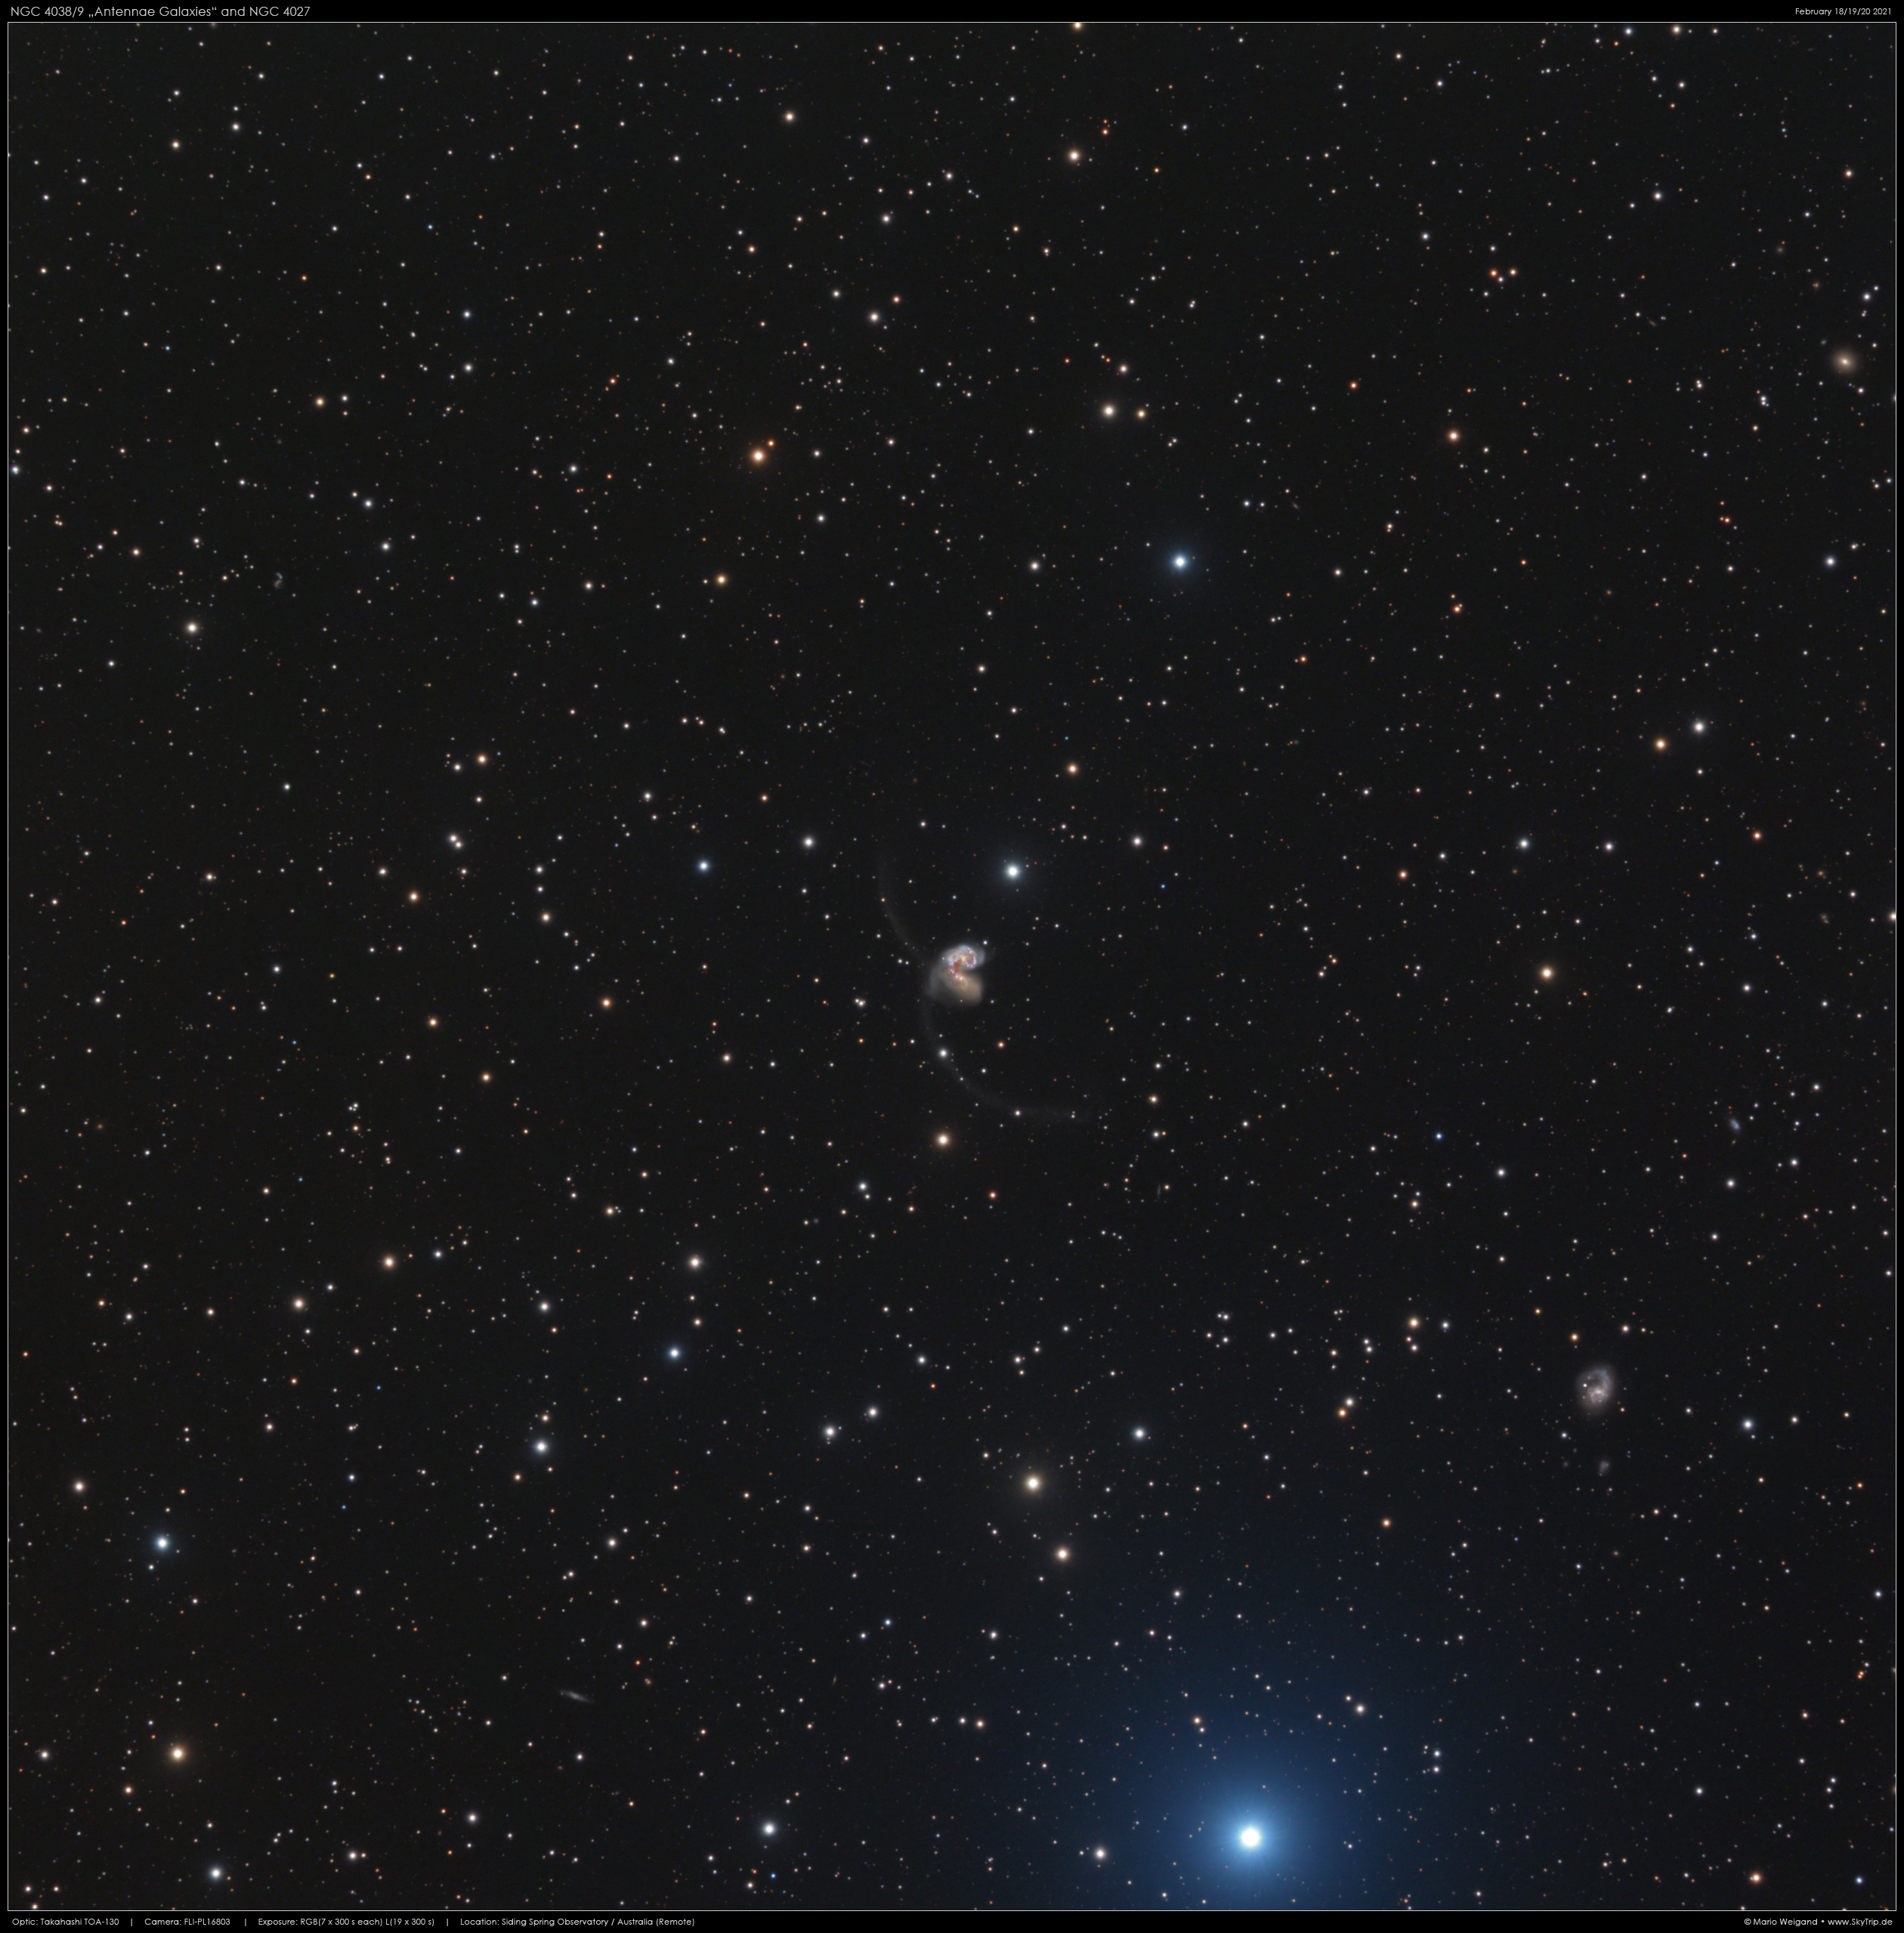 Die Antennengalaxien NGC 4038/9 & NGC 4027